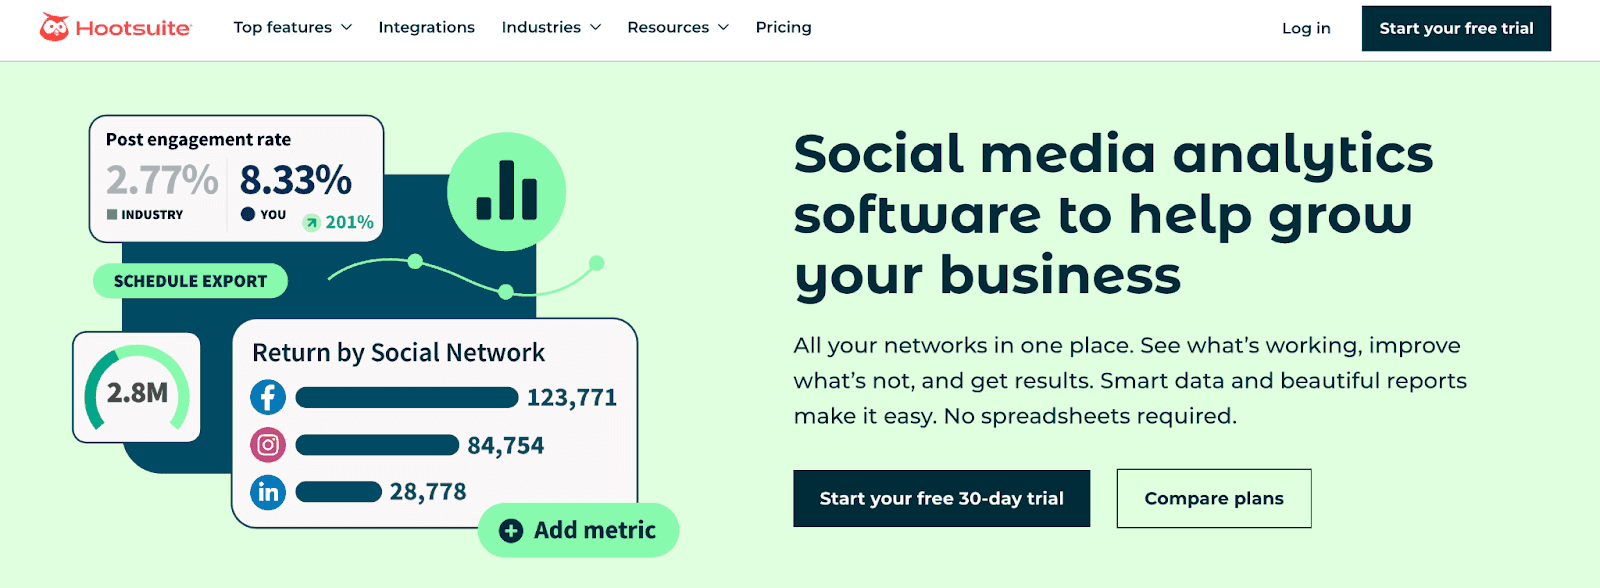 Social media analytics software to help grow your business